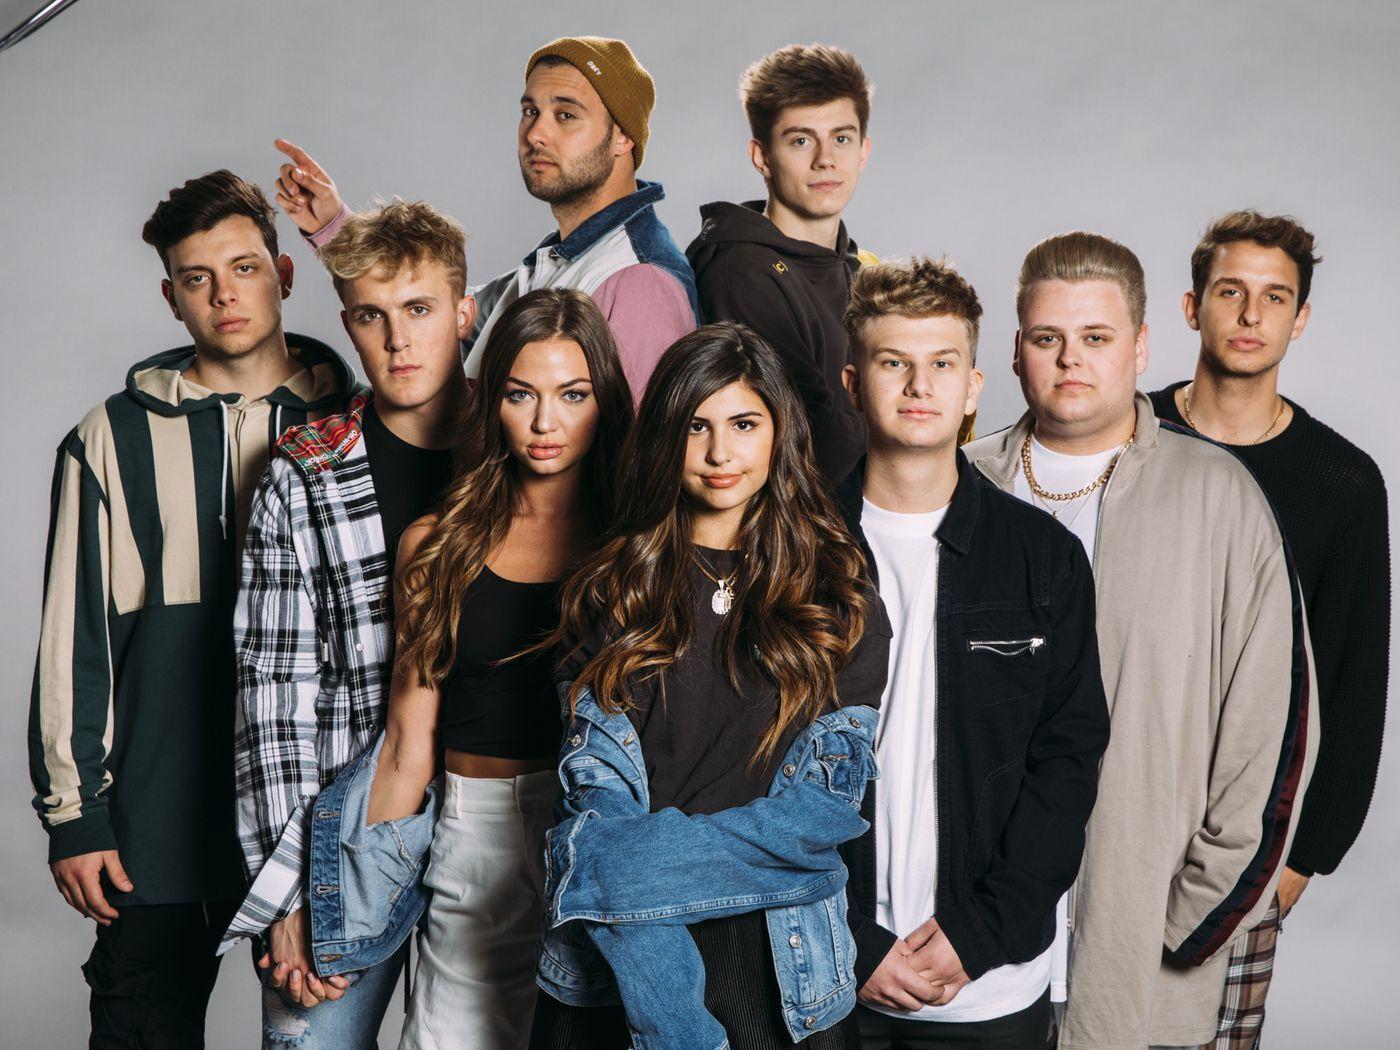 Jake Paul's Team 10 YouTube empire might be imploding